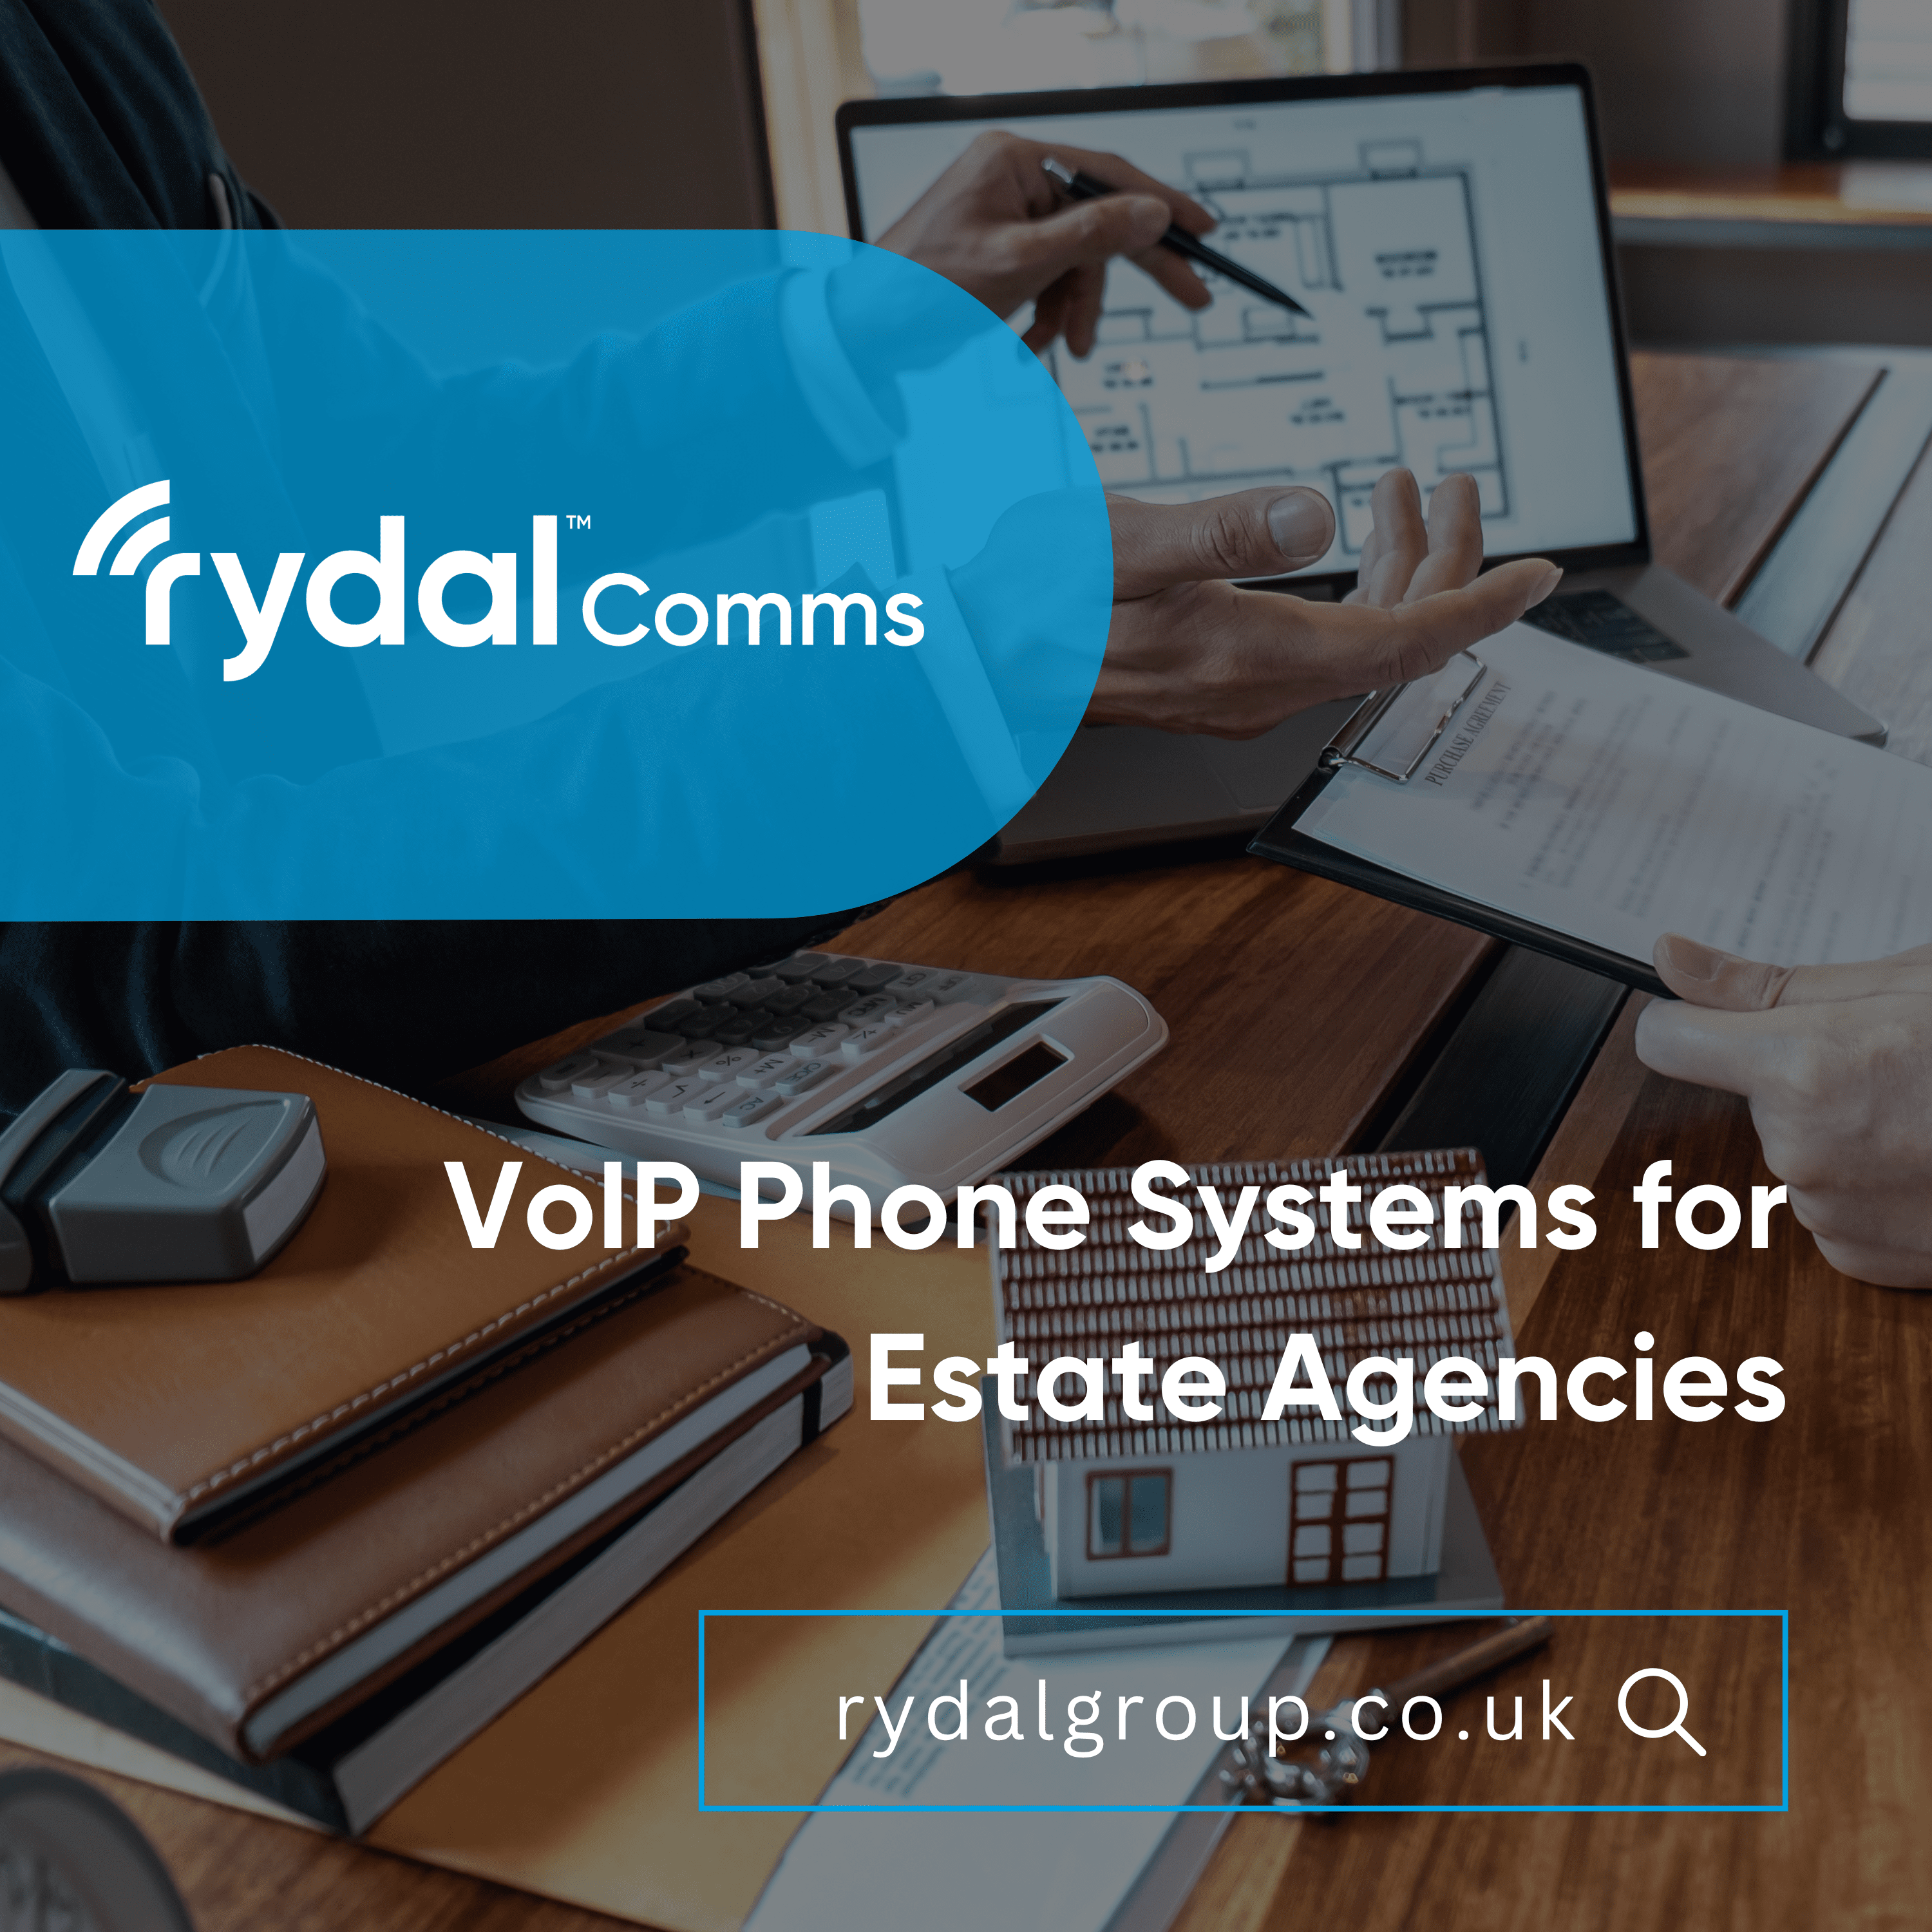 VoIP Phone Systems for Estate Agencies